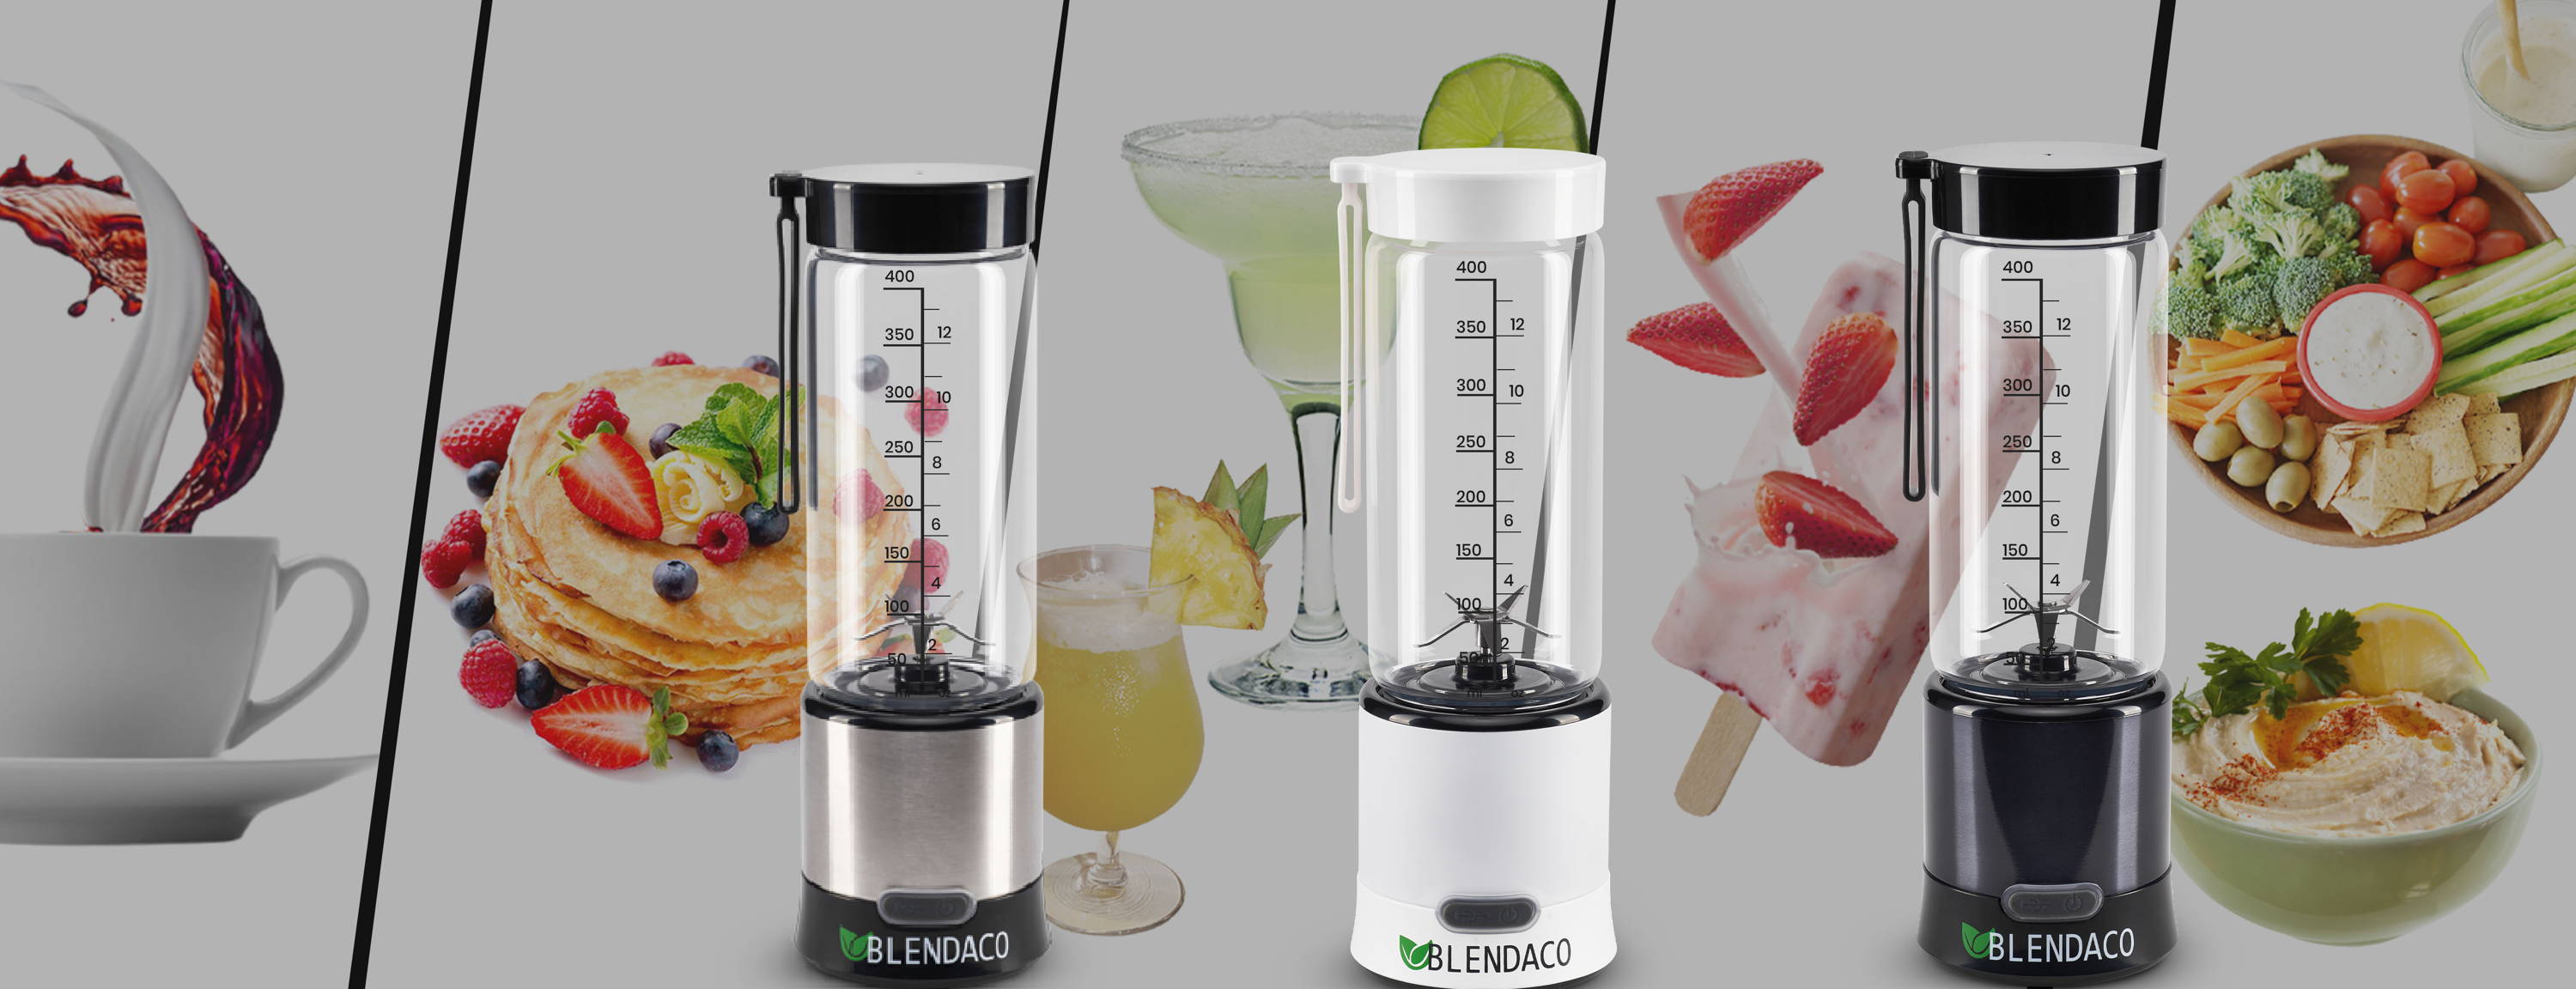 5 Things You Can Blend in Your Portable Blender That Aren't